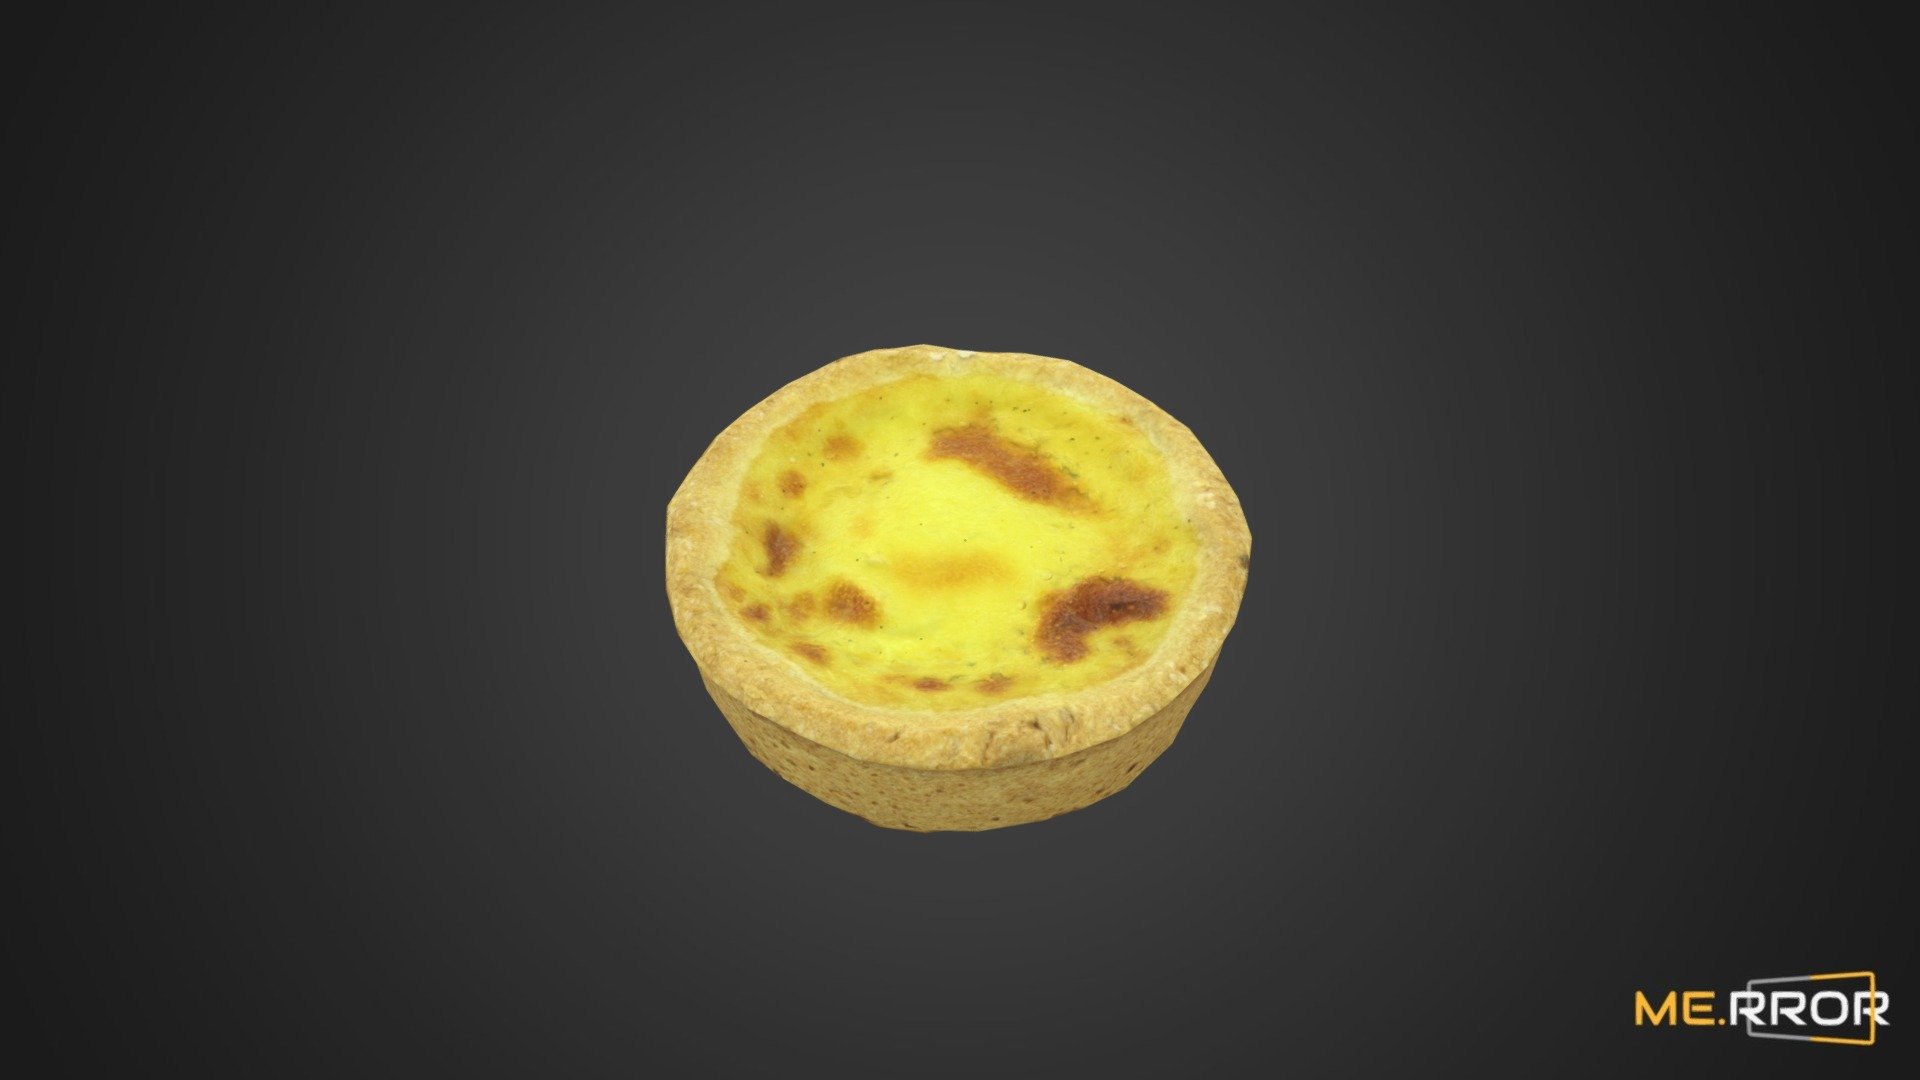 MERROR is a 3D Content PLATFORM which introduces various Asian assets to the 3D world


3DScanning #Photogrametry #ME.RROR - [Game-Ready] Egg Tarte - Buy Royalty Free 3D model by ME.RROR Studio (@merror) 3d model